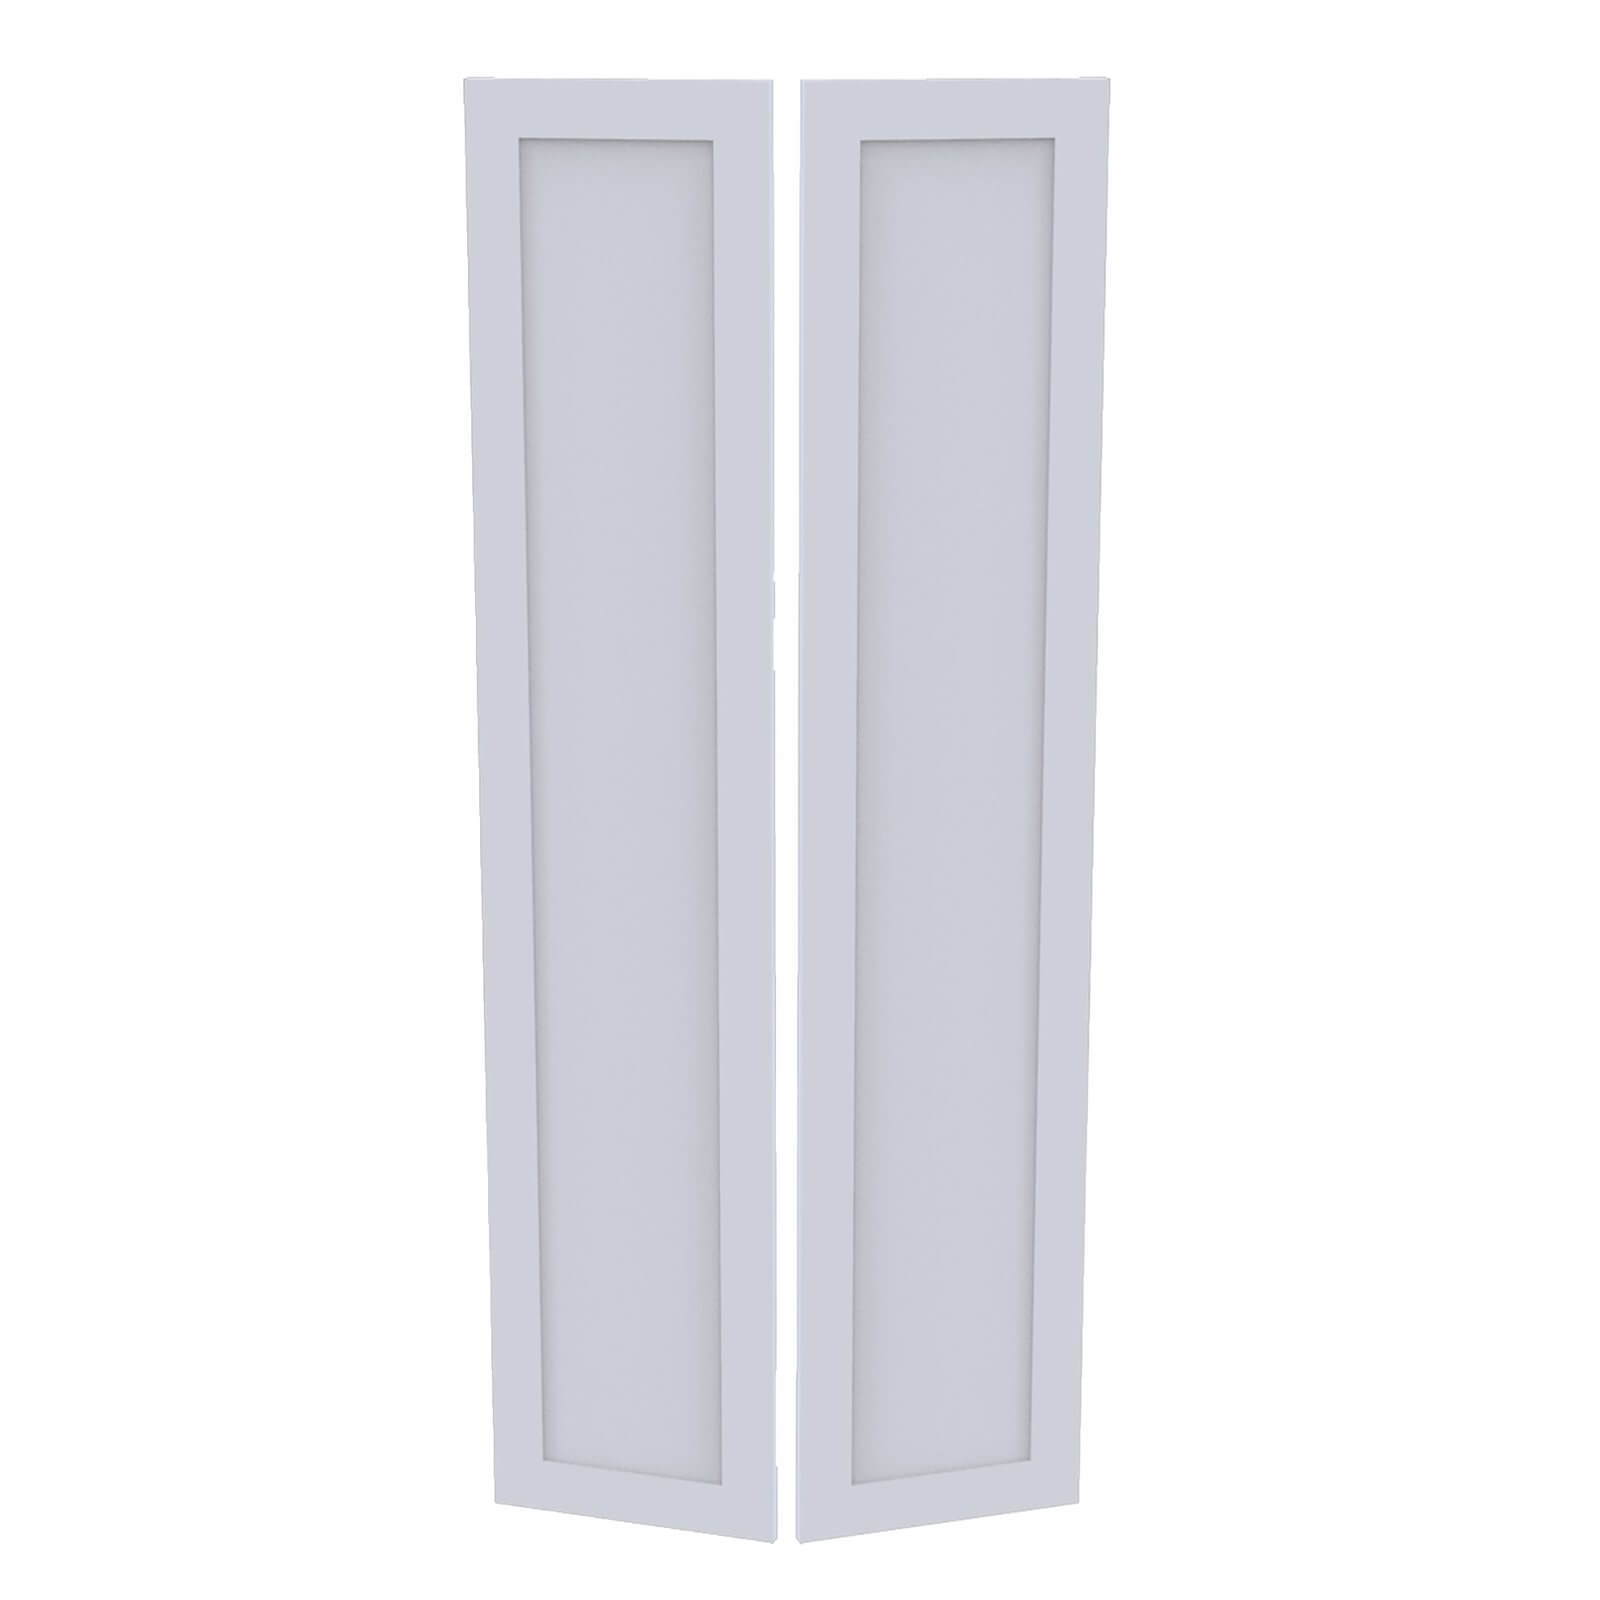 Fitted Bedroom Shaker Double Wardrobe Doors - White